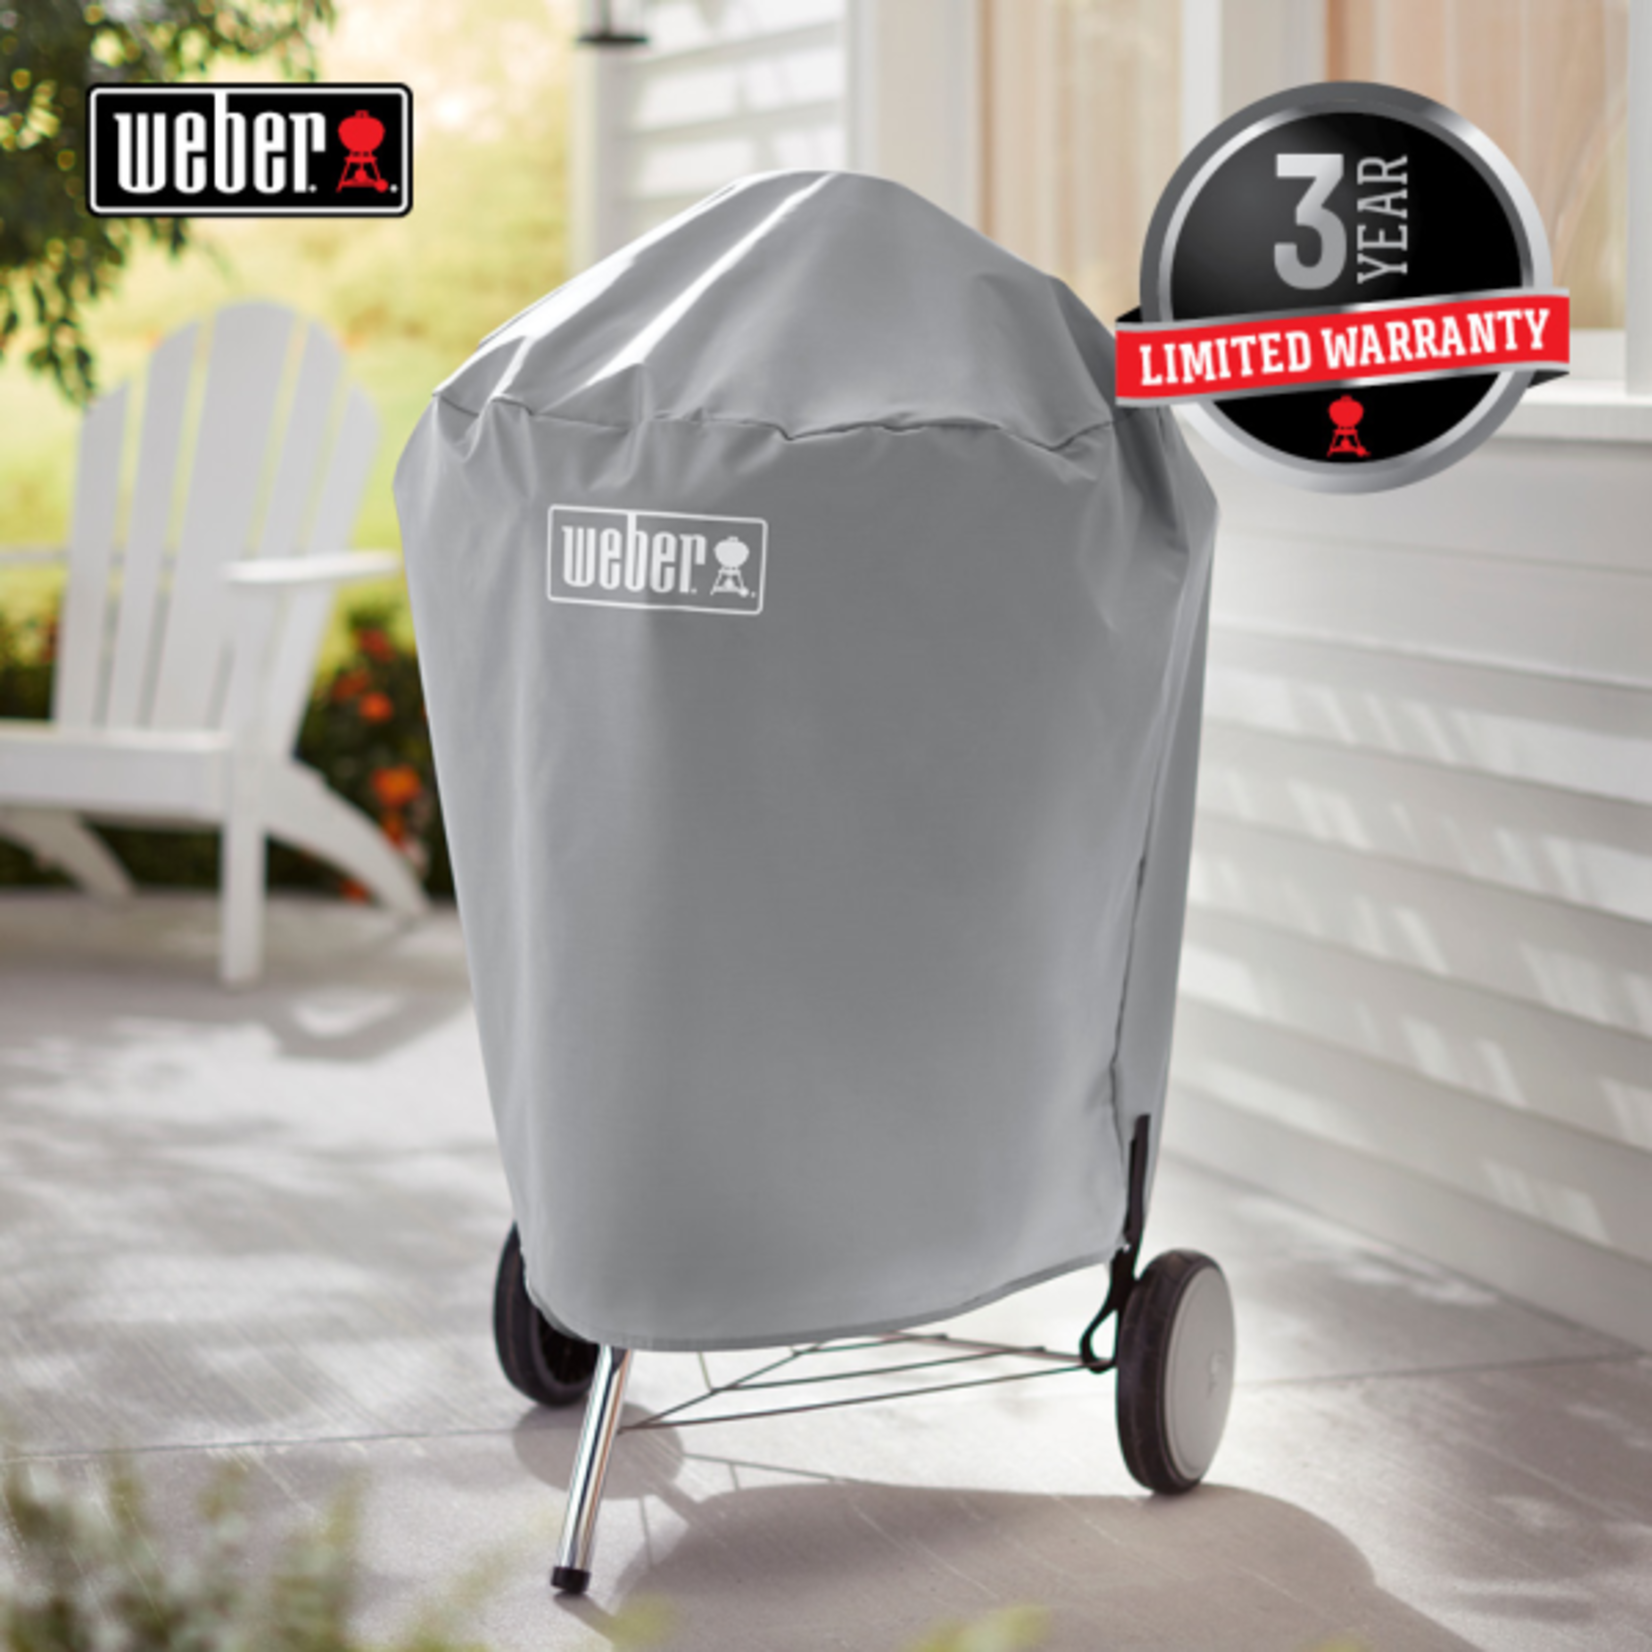 Weber Grill Cover - Fits 22" charcoal grills